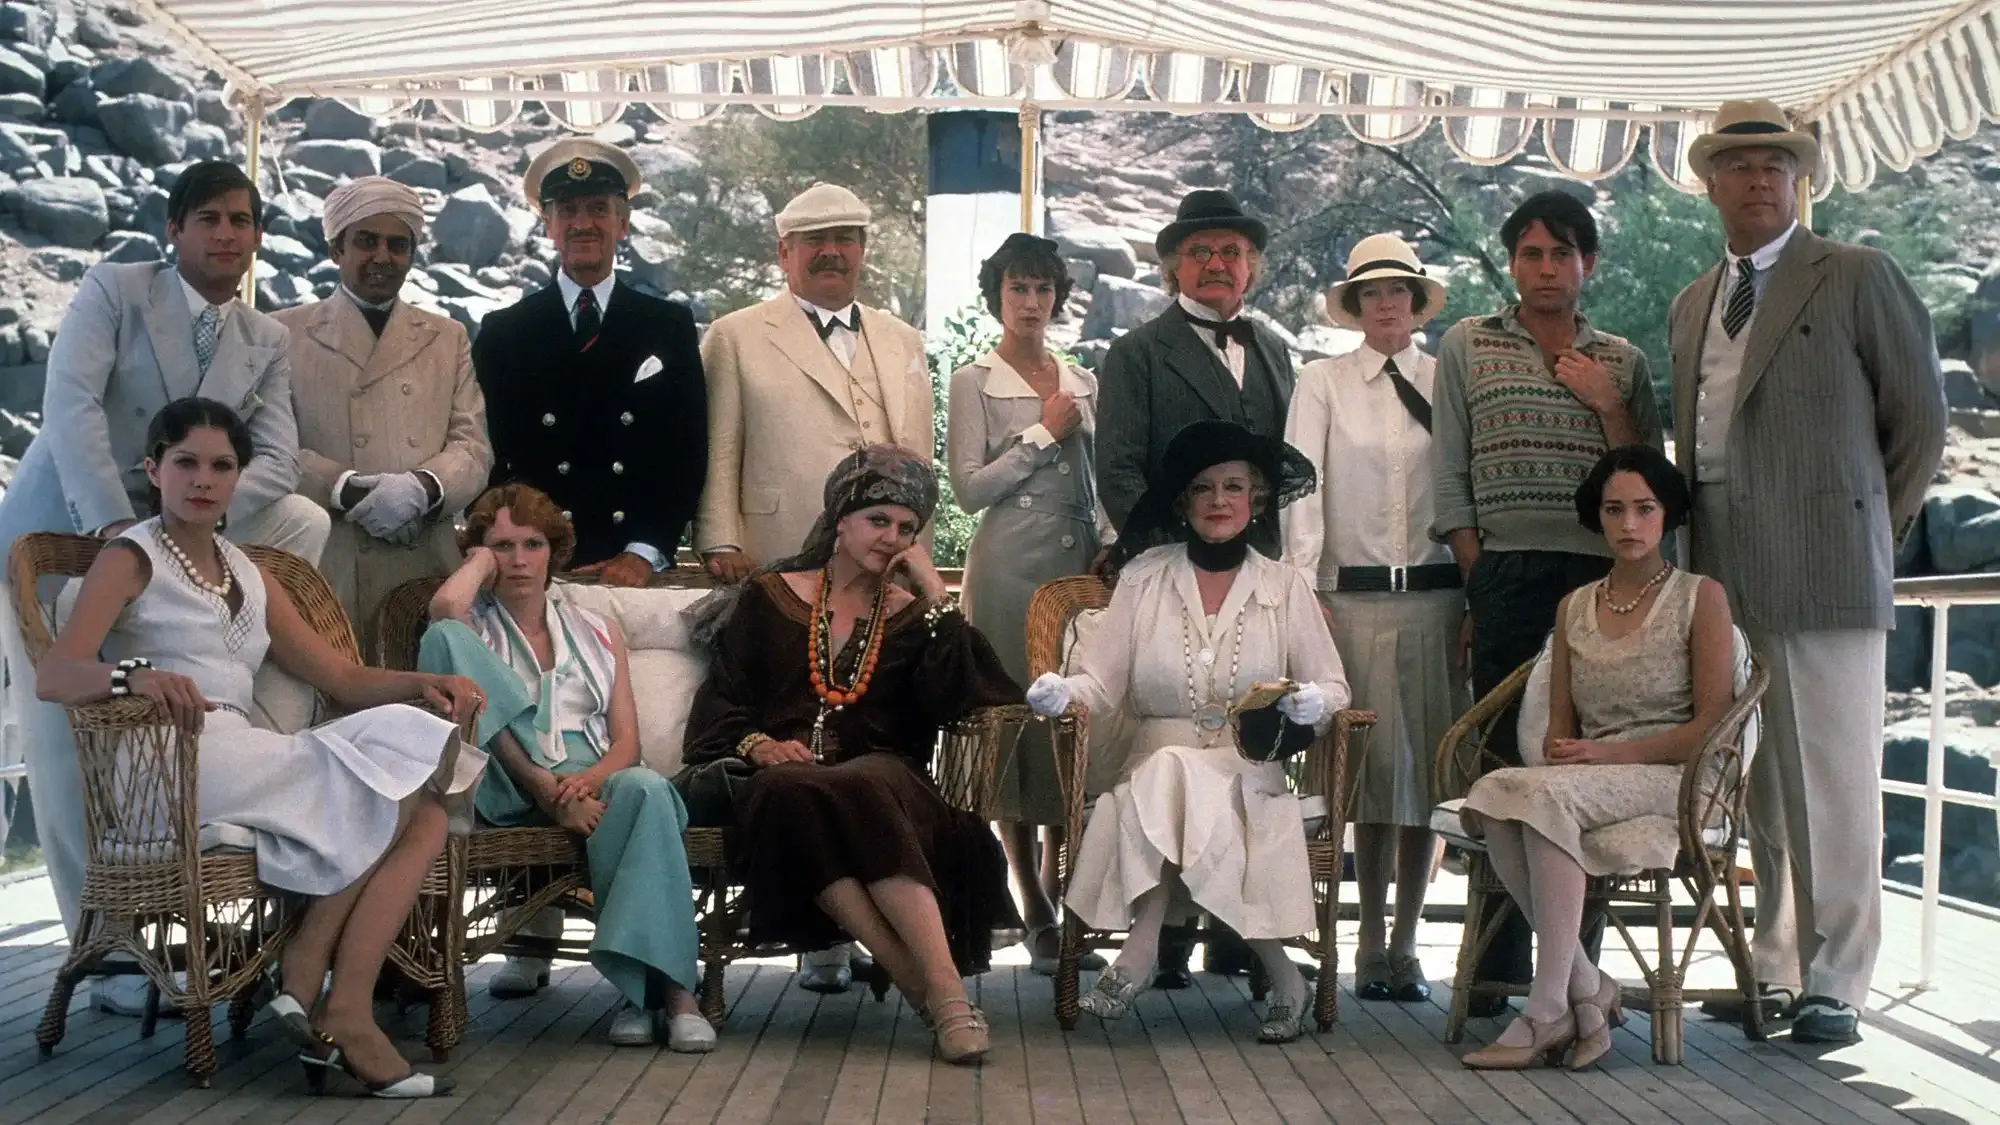 Death on the Nile movie review